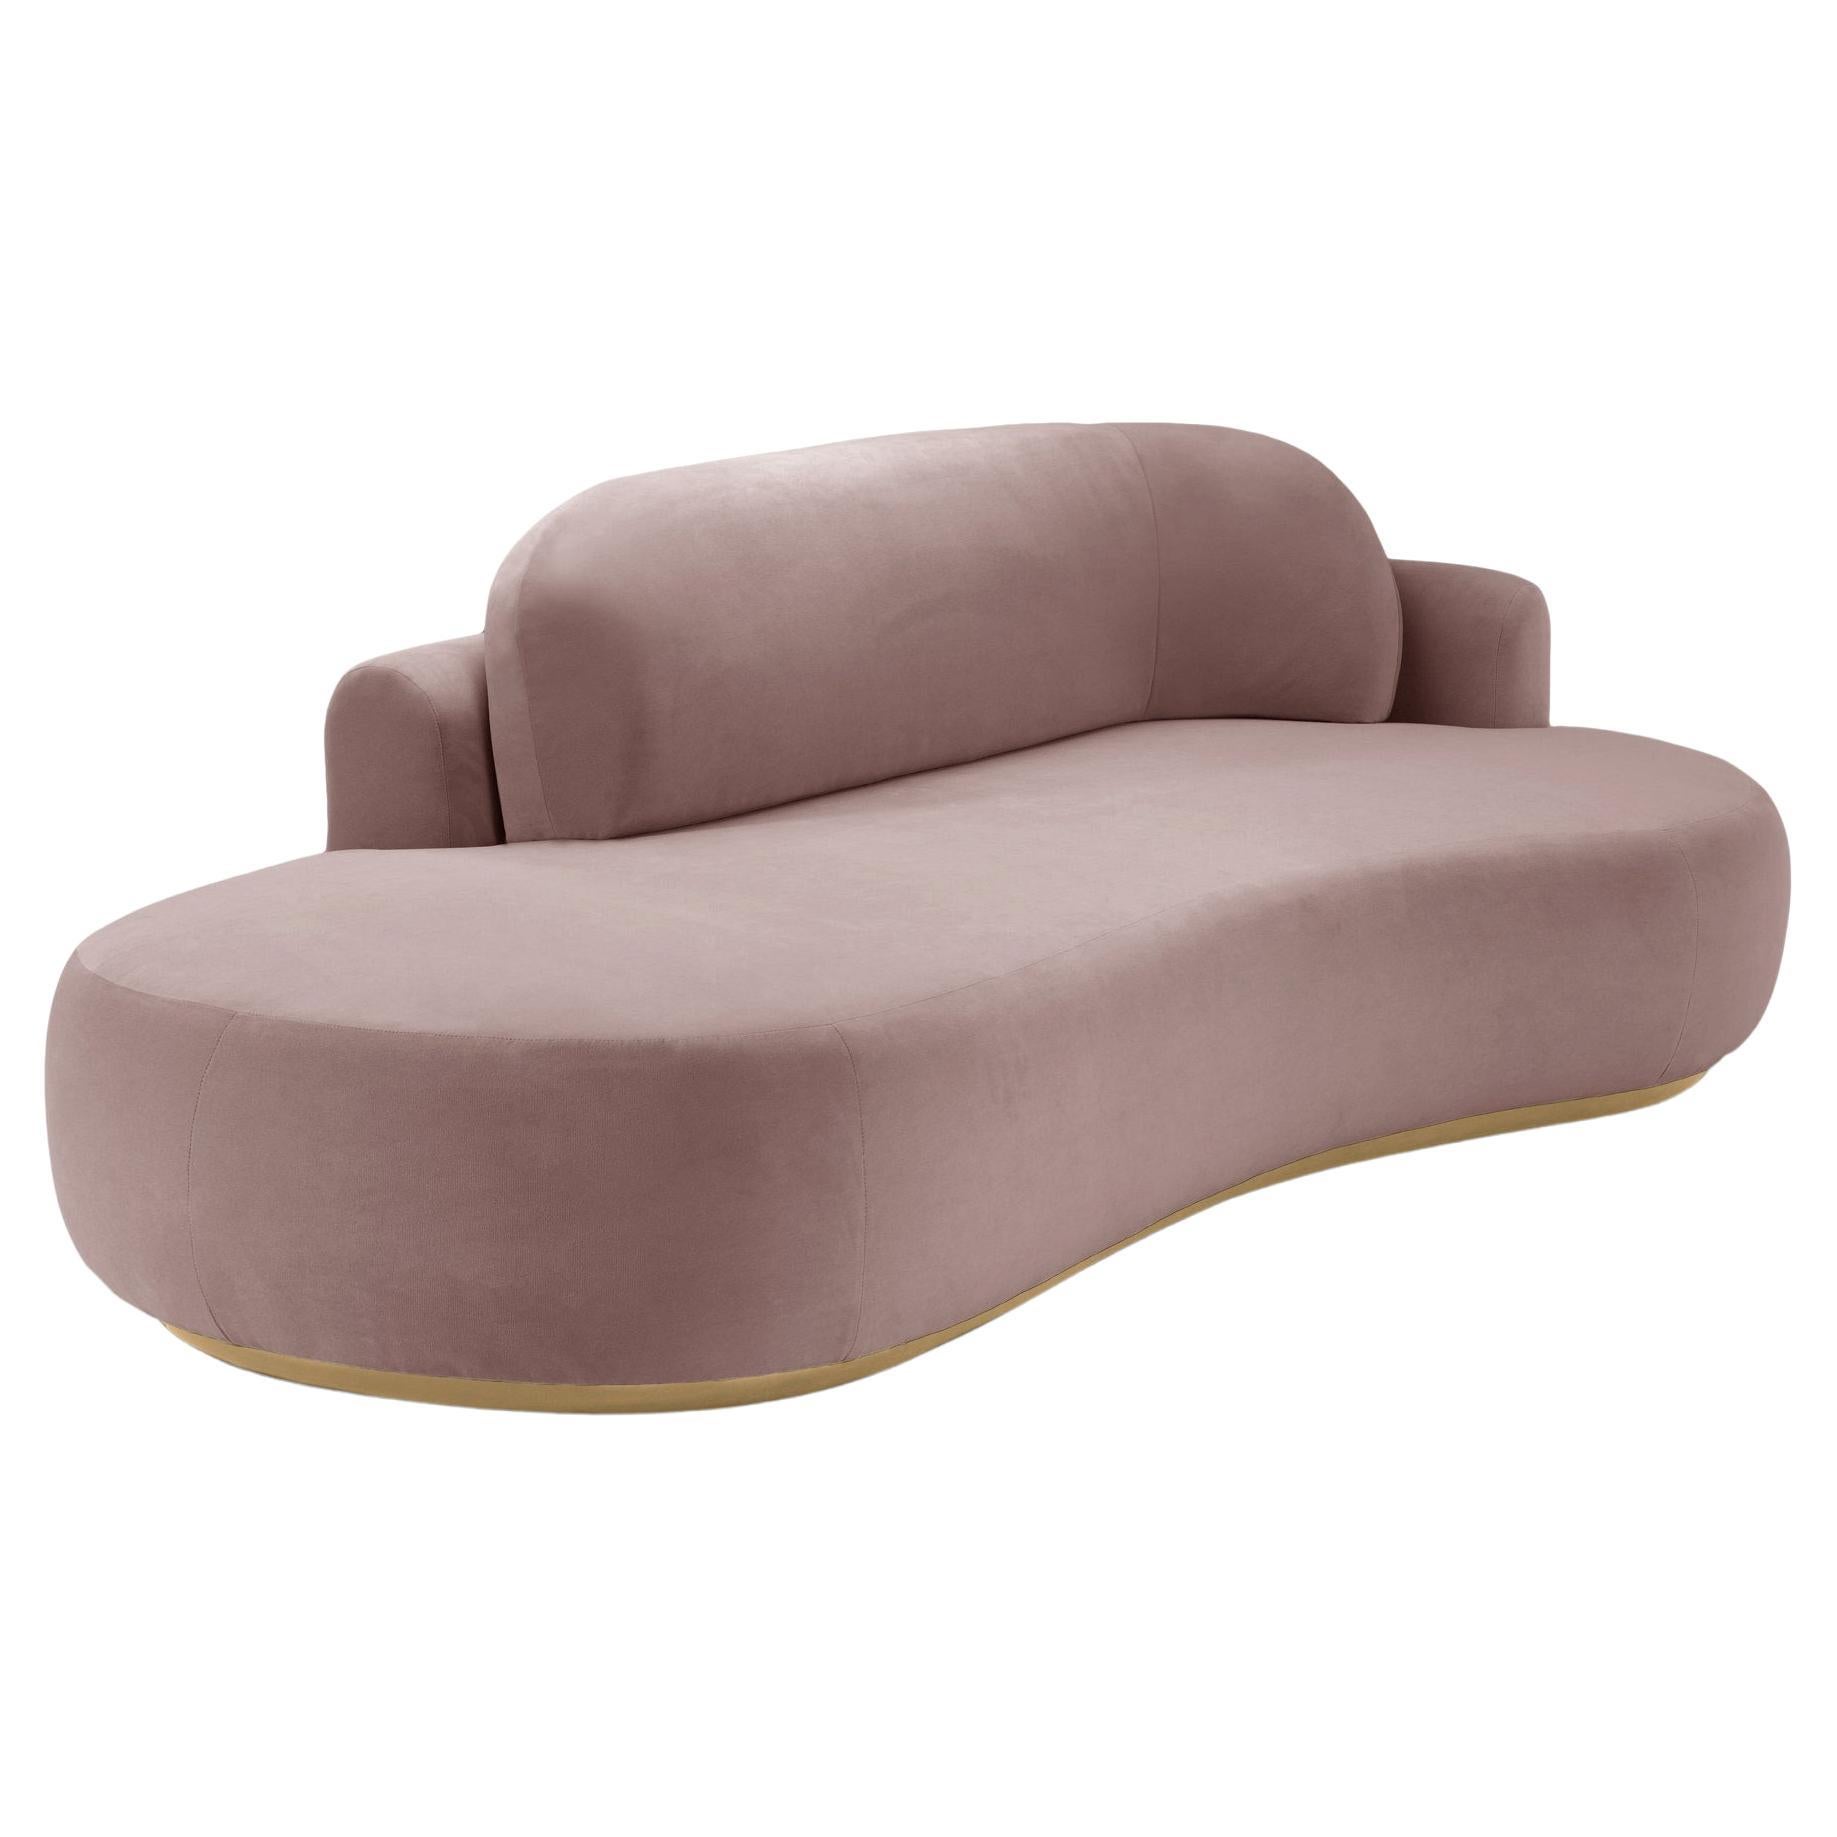 Naked Curved Sofa Single with Natural Oak and Barcelona Lotus For Sale